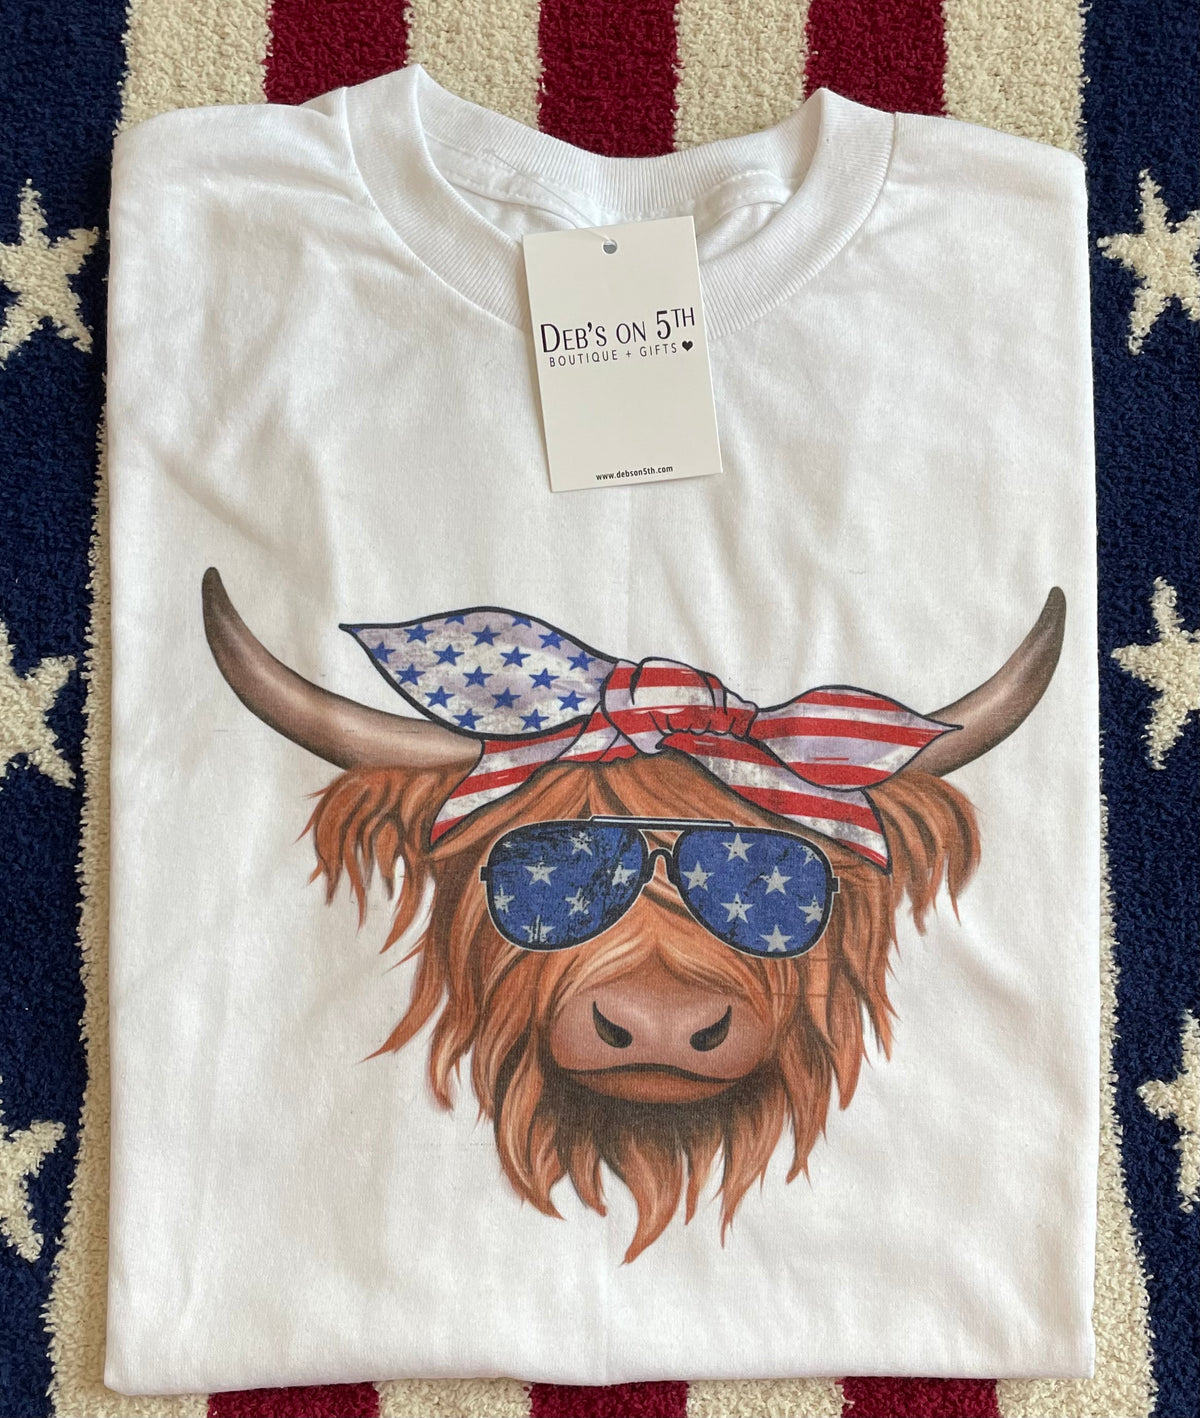 Highland Cow with Sunglasses Graphic Tee